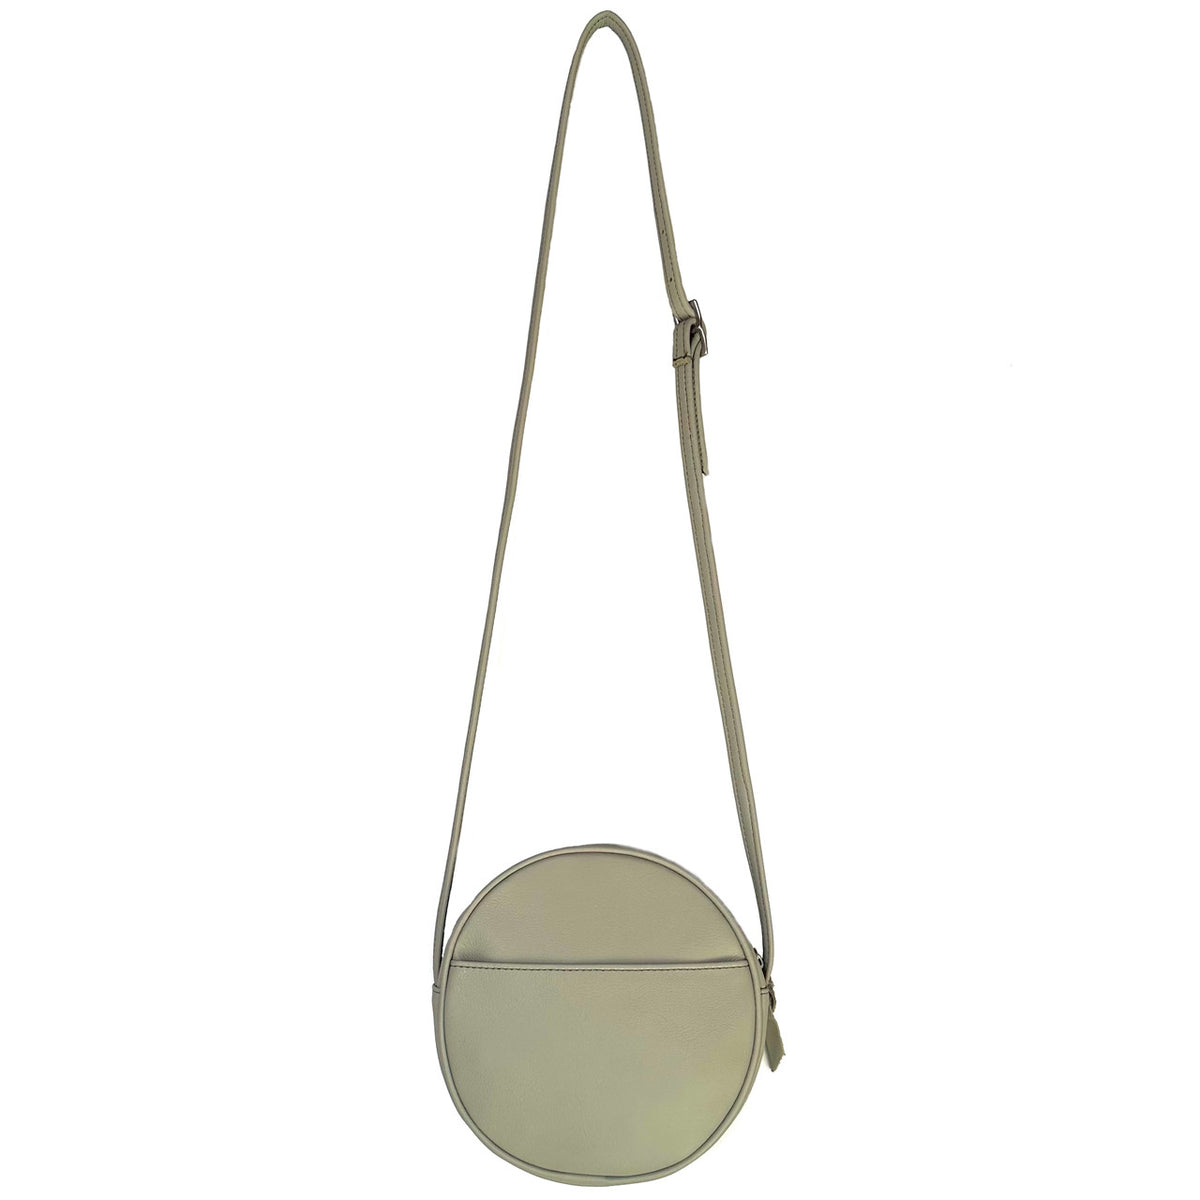 UnoEth Zuri Circle Bag 40% off at Checkout – Liberated Roots Collection